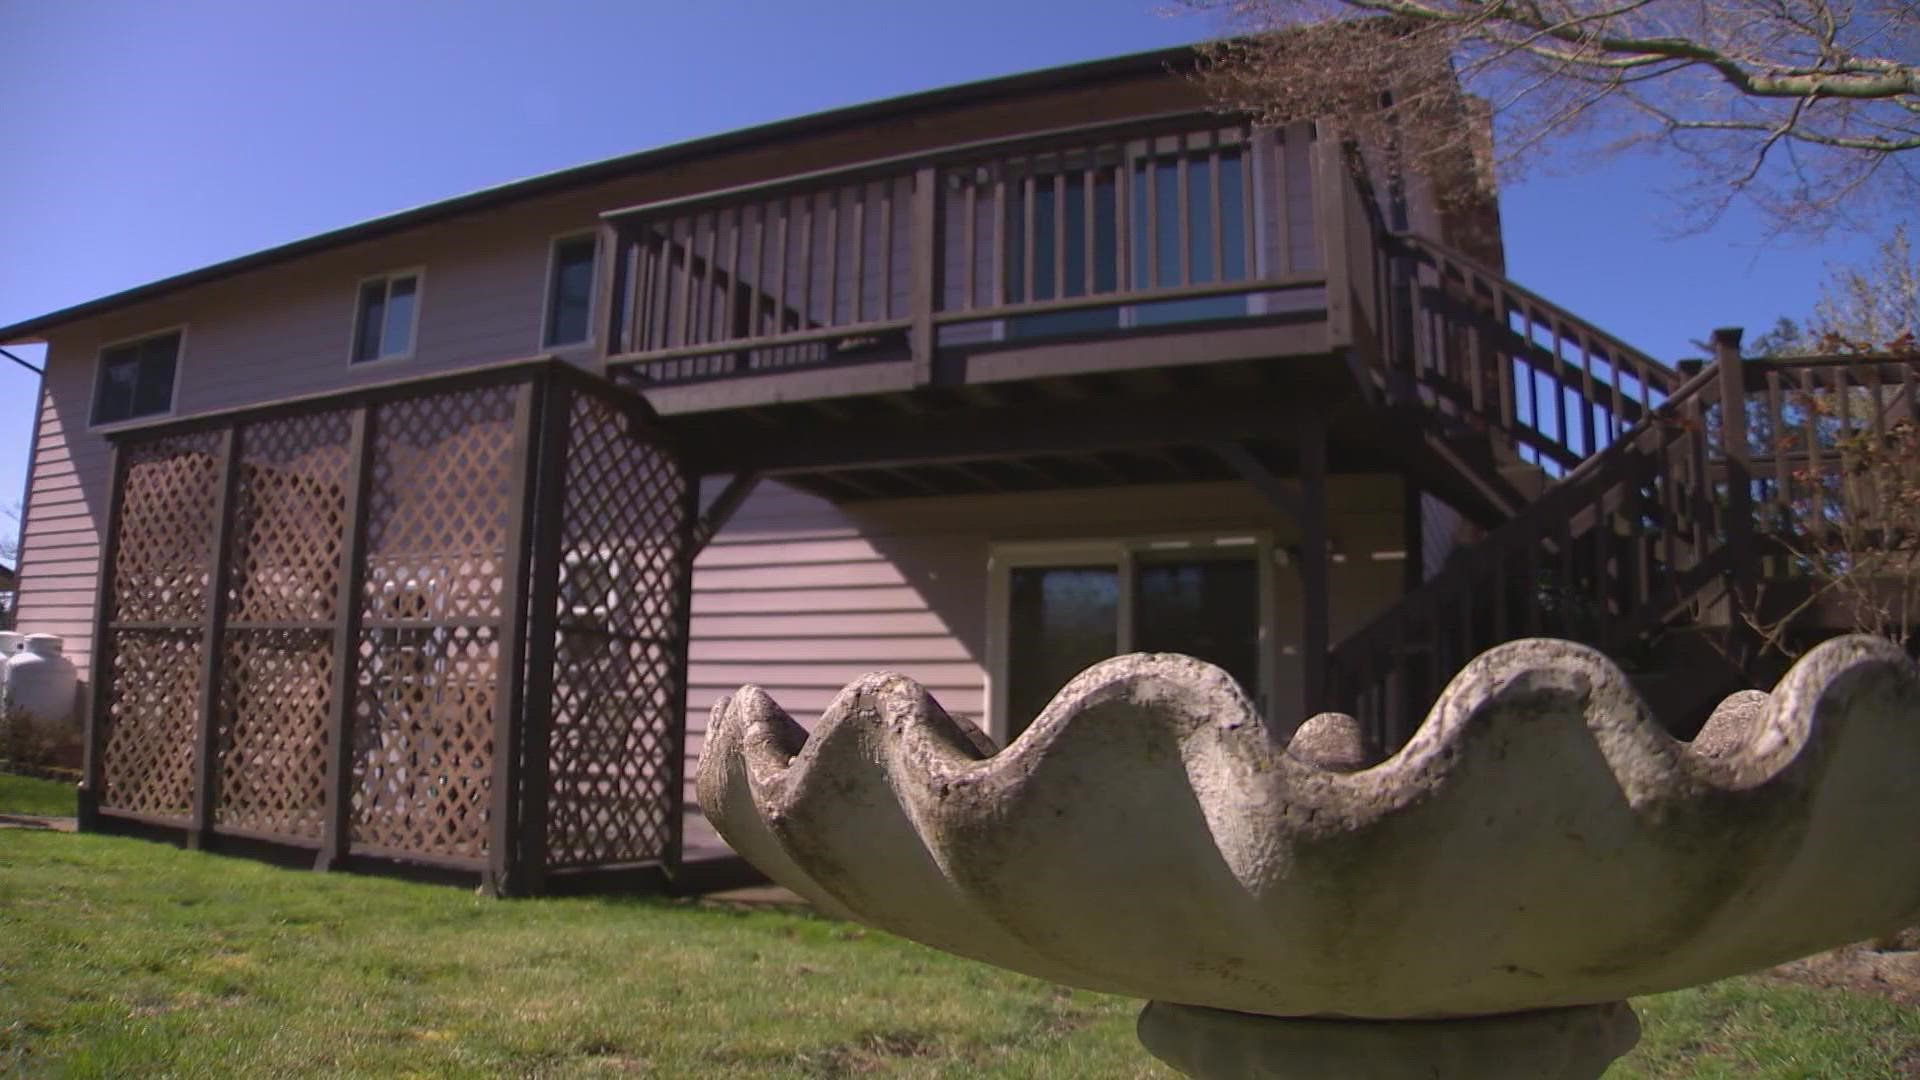 Chieko Durham said she wasn't aware her home was put up for auction by the bank. Now her friends are raising money to buy her home back from the new owner.